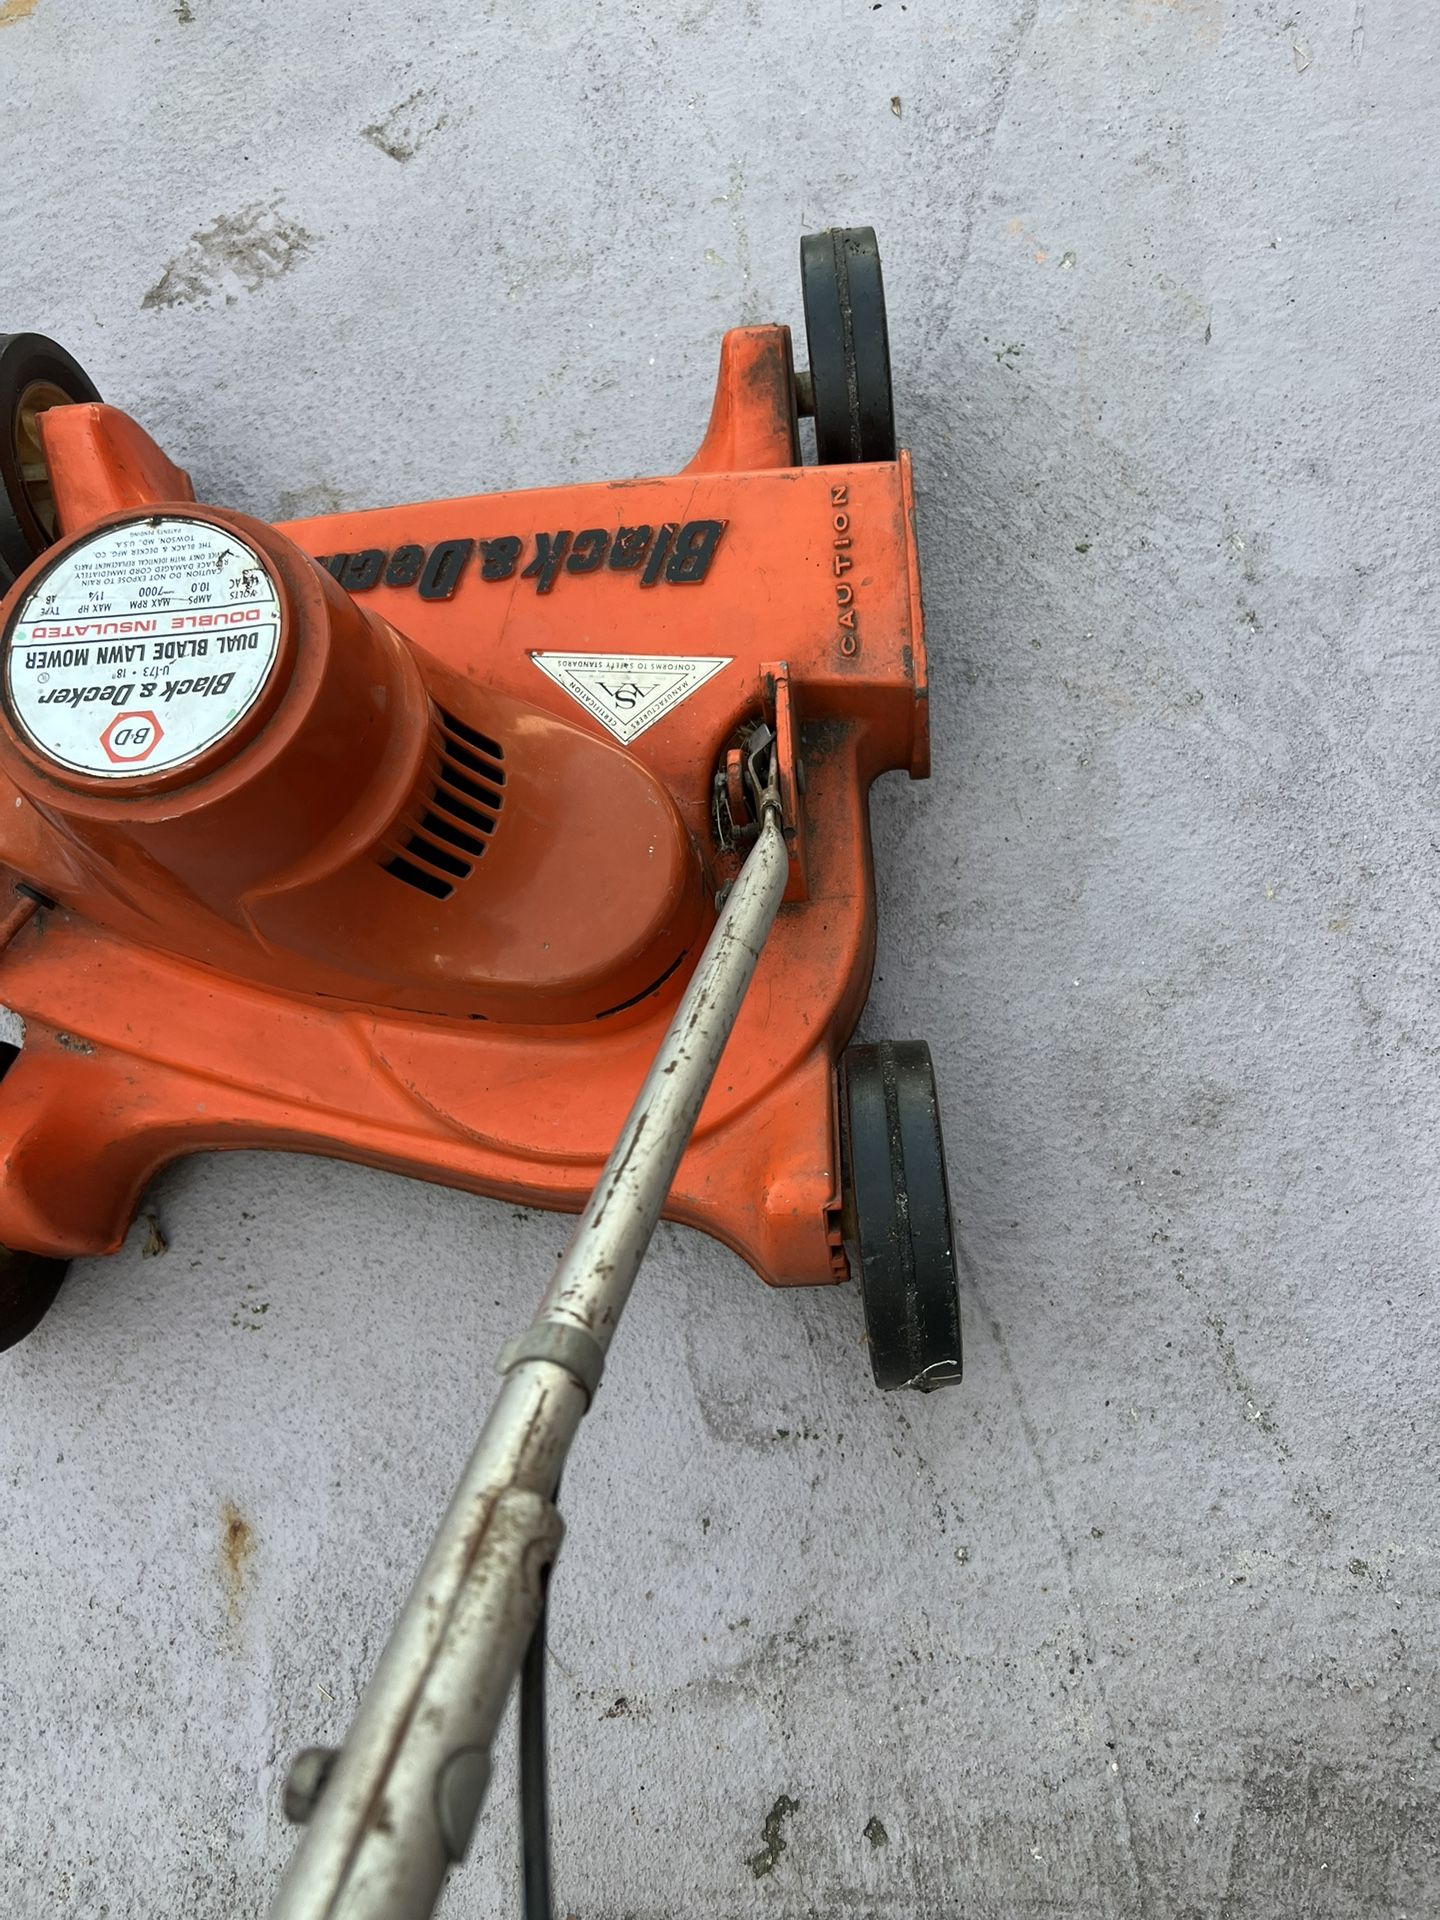 Vintage Black and Decker Electric Lawn mower Made In USA for Sale